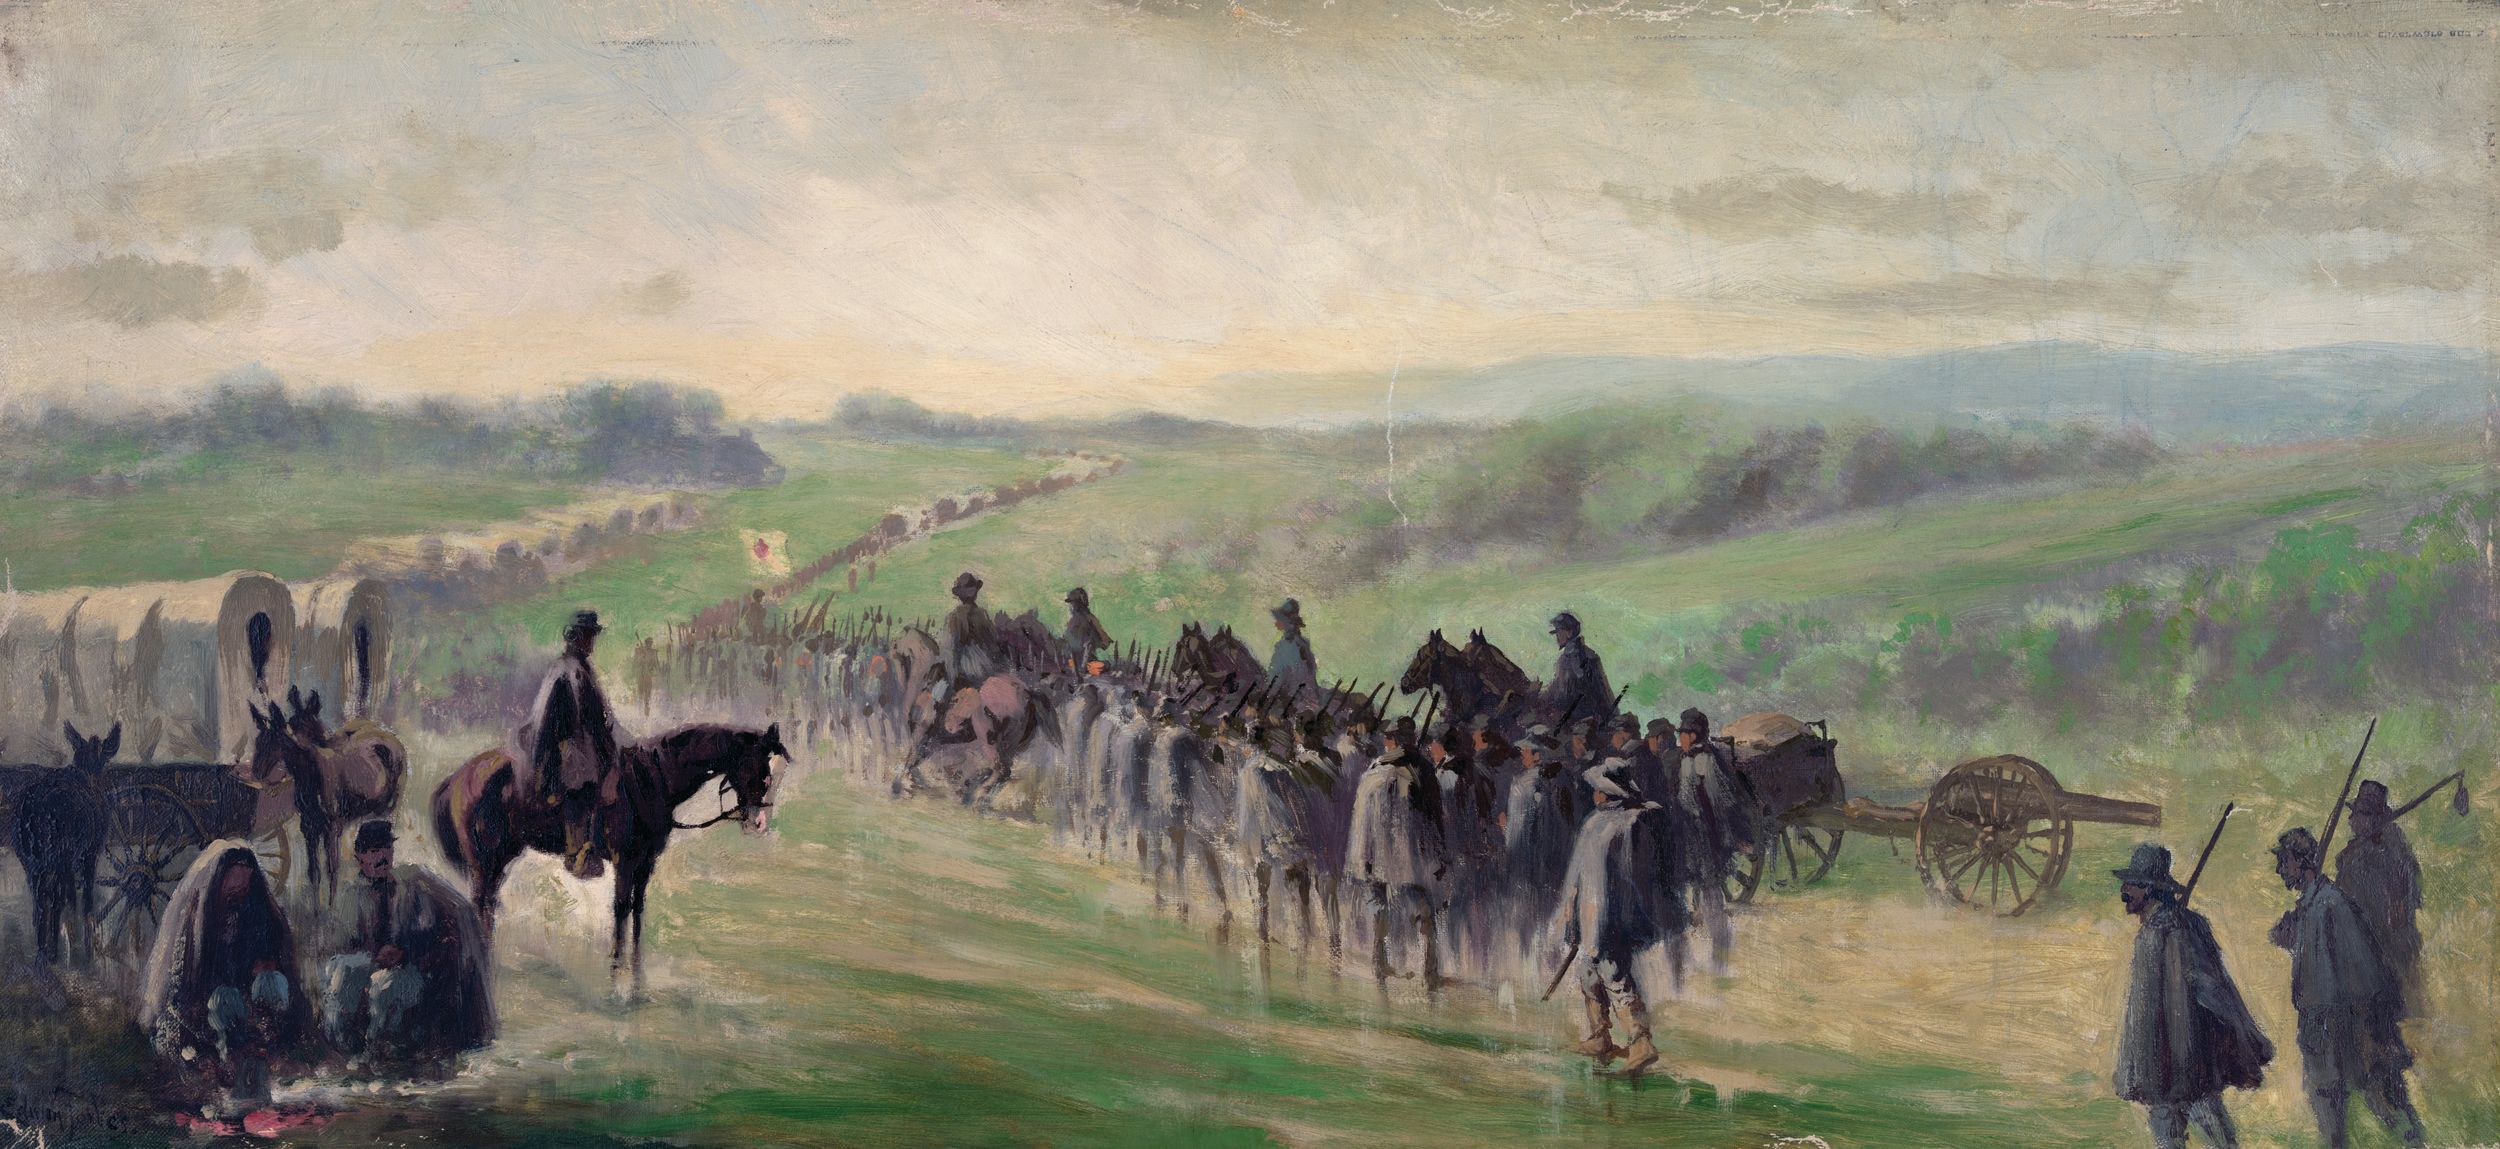 “Pursuit of Lee's Army,” by Edwin Forbes (1839-1895) depicts Union soldiers marching through the rain on the road near Emmitsburg, Maryland, July 7, 1863. Pursued by U.S. General George Meade after the Battle of Gettysburg, General Robert E. Lee is trying to get his long wagon trains over the Potomac River and back to the relative safety of Virginia.